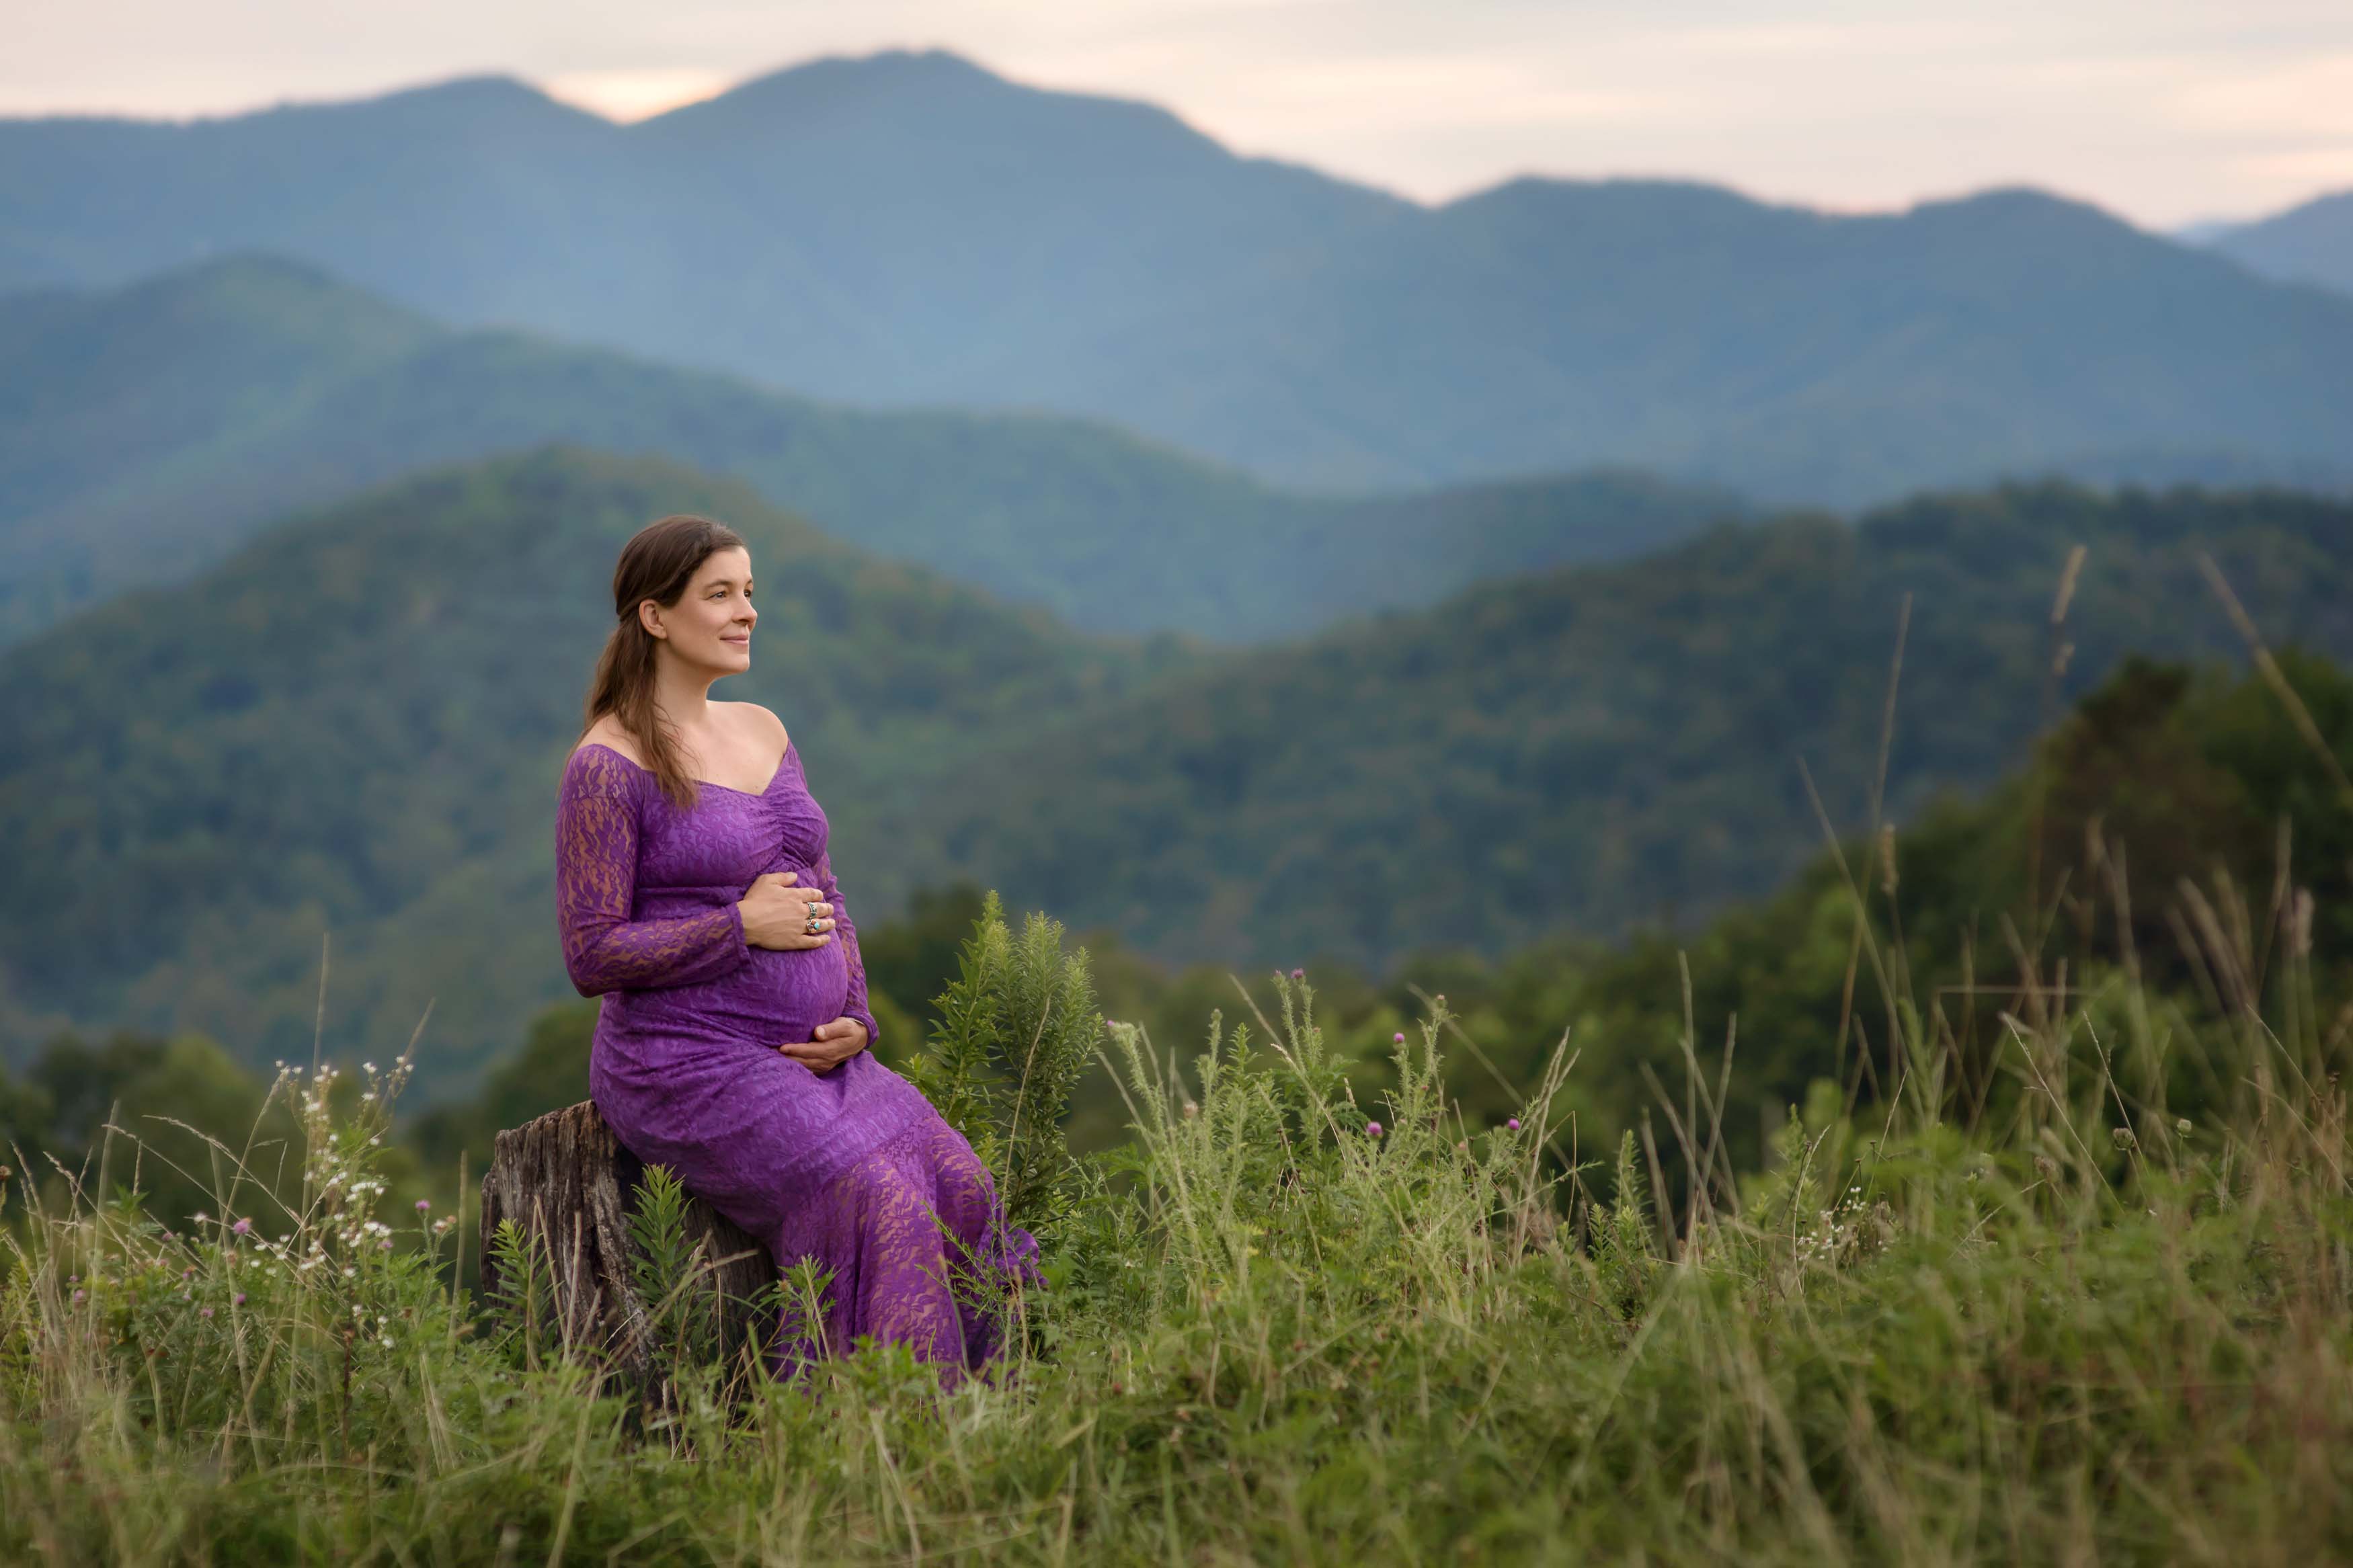 Pregnancy photo of a mom-to-be in a purple dress with mountains in the background.